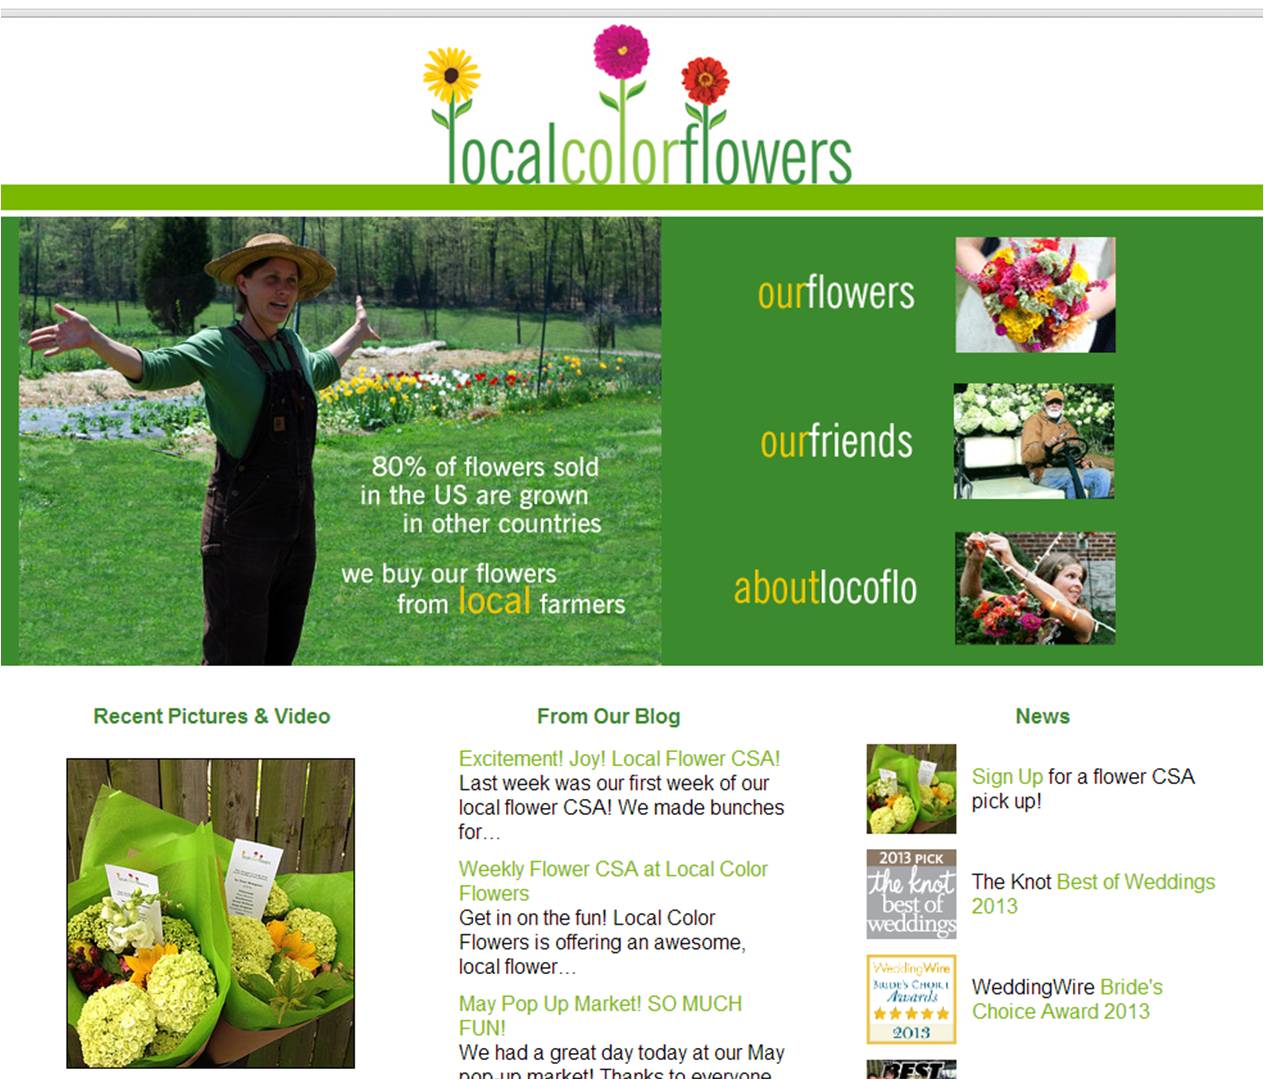 Home page for Local Color Flowers' web site.